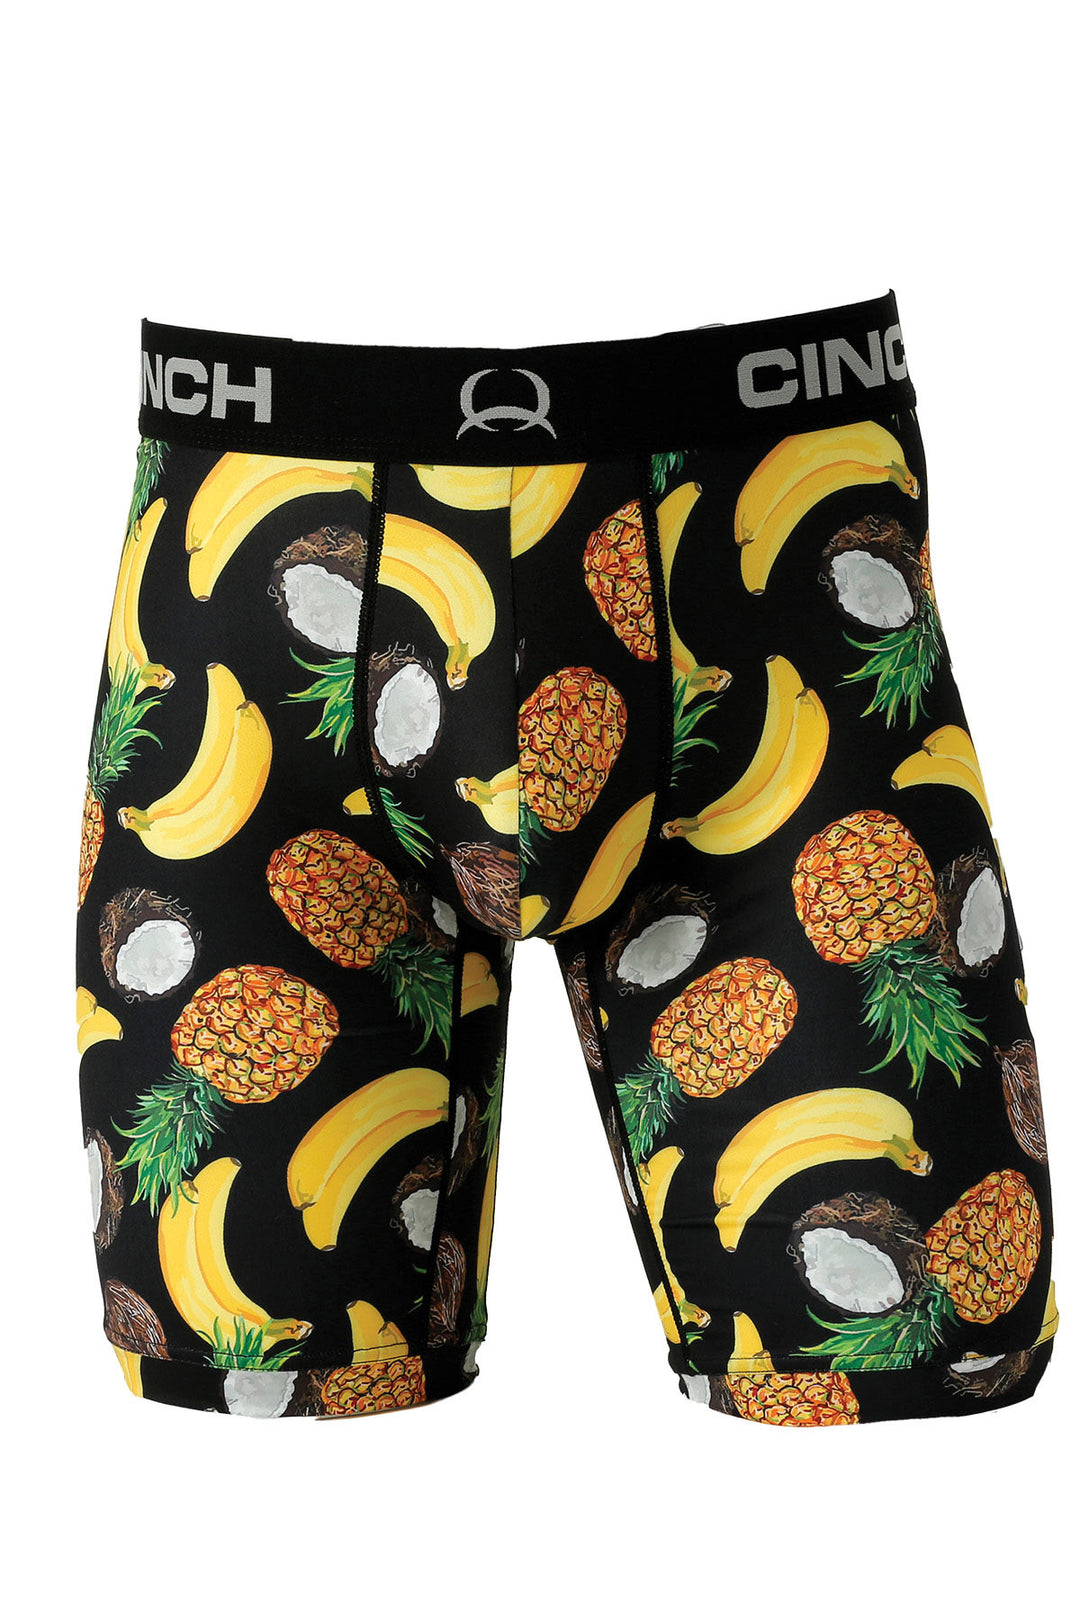 Cinch | 9" Boxer Brief | Pineapple